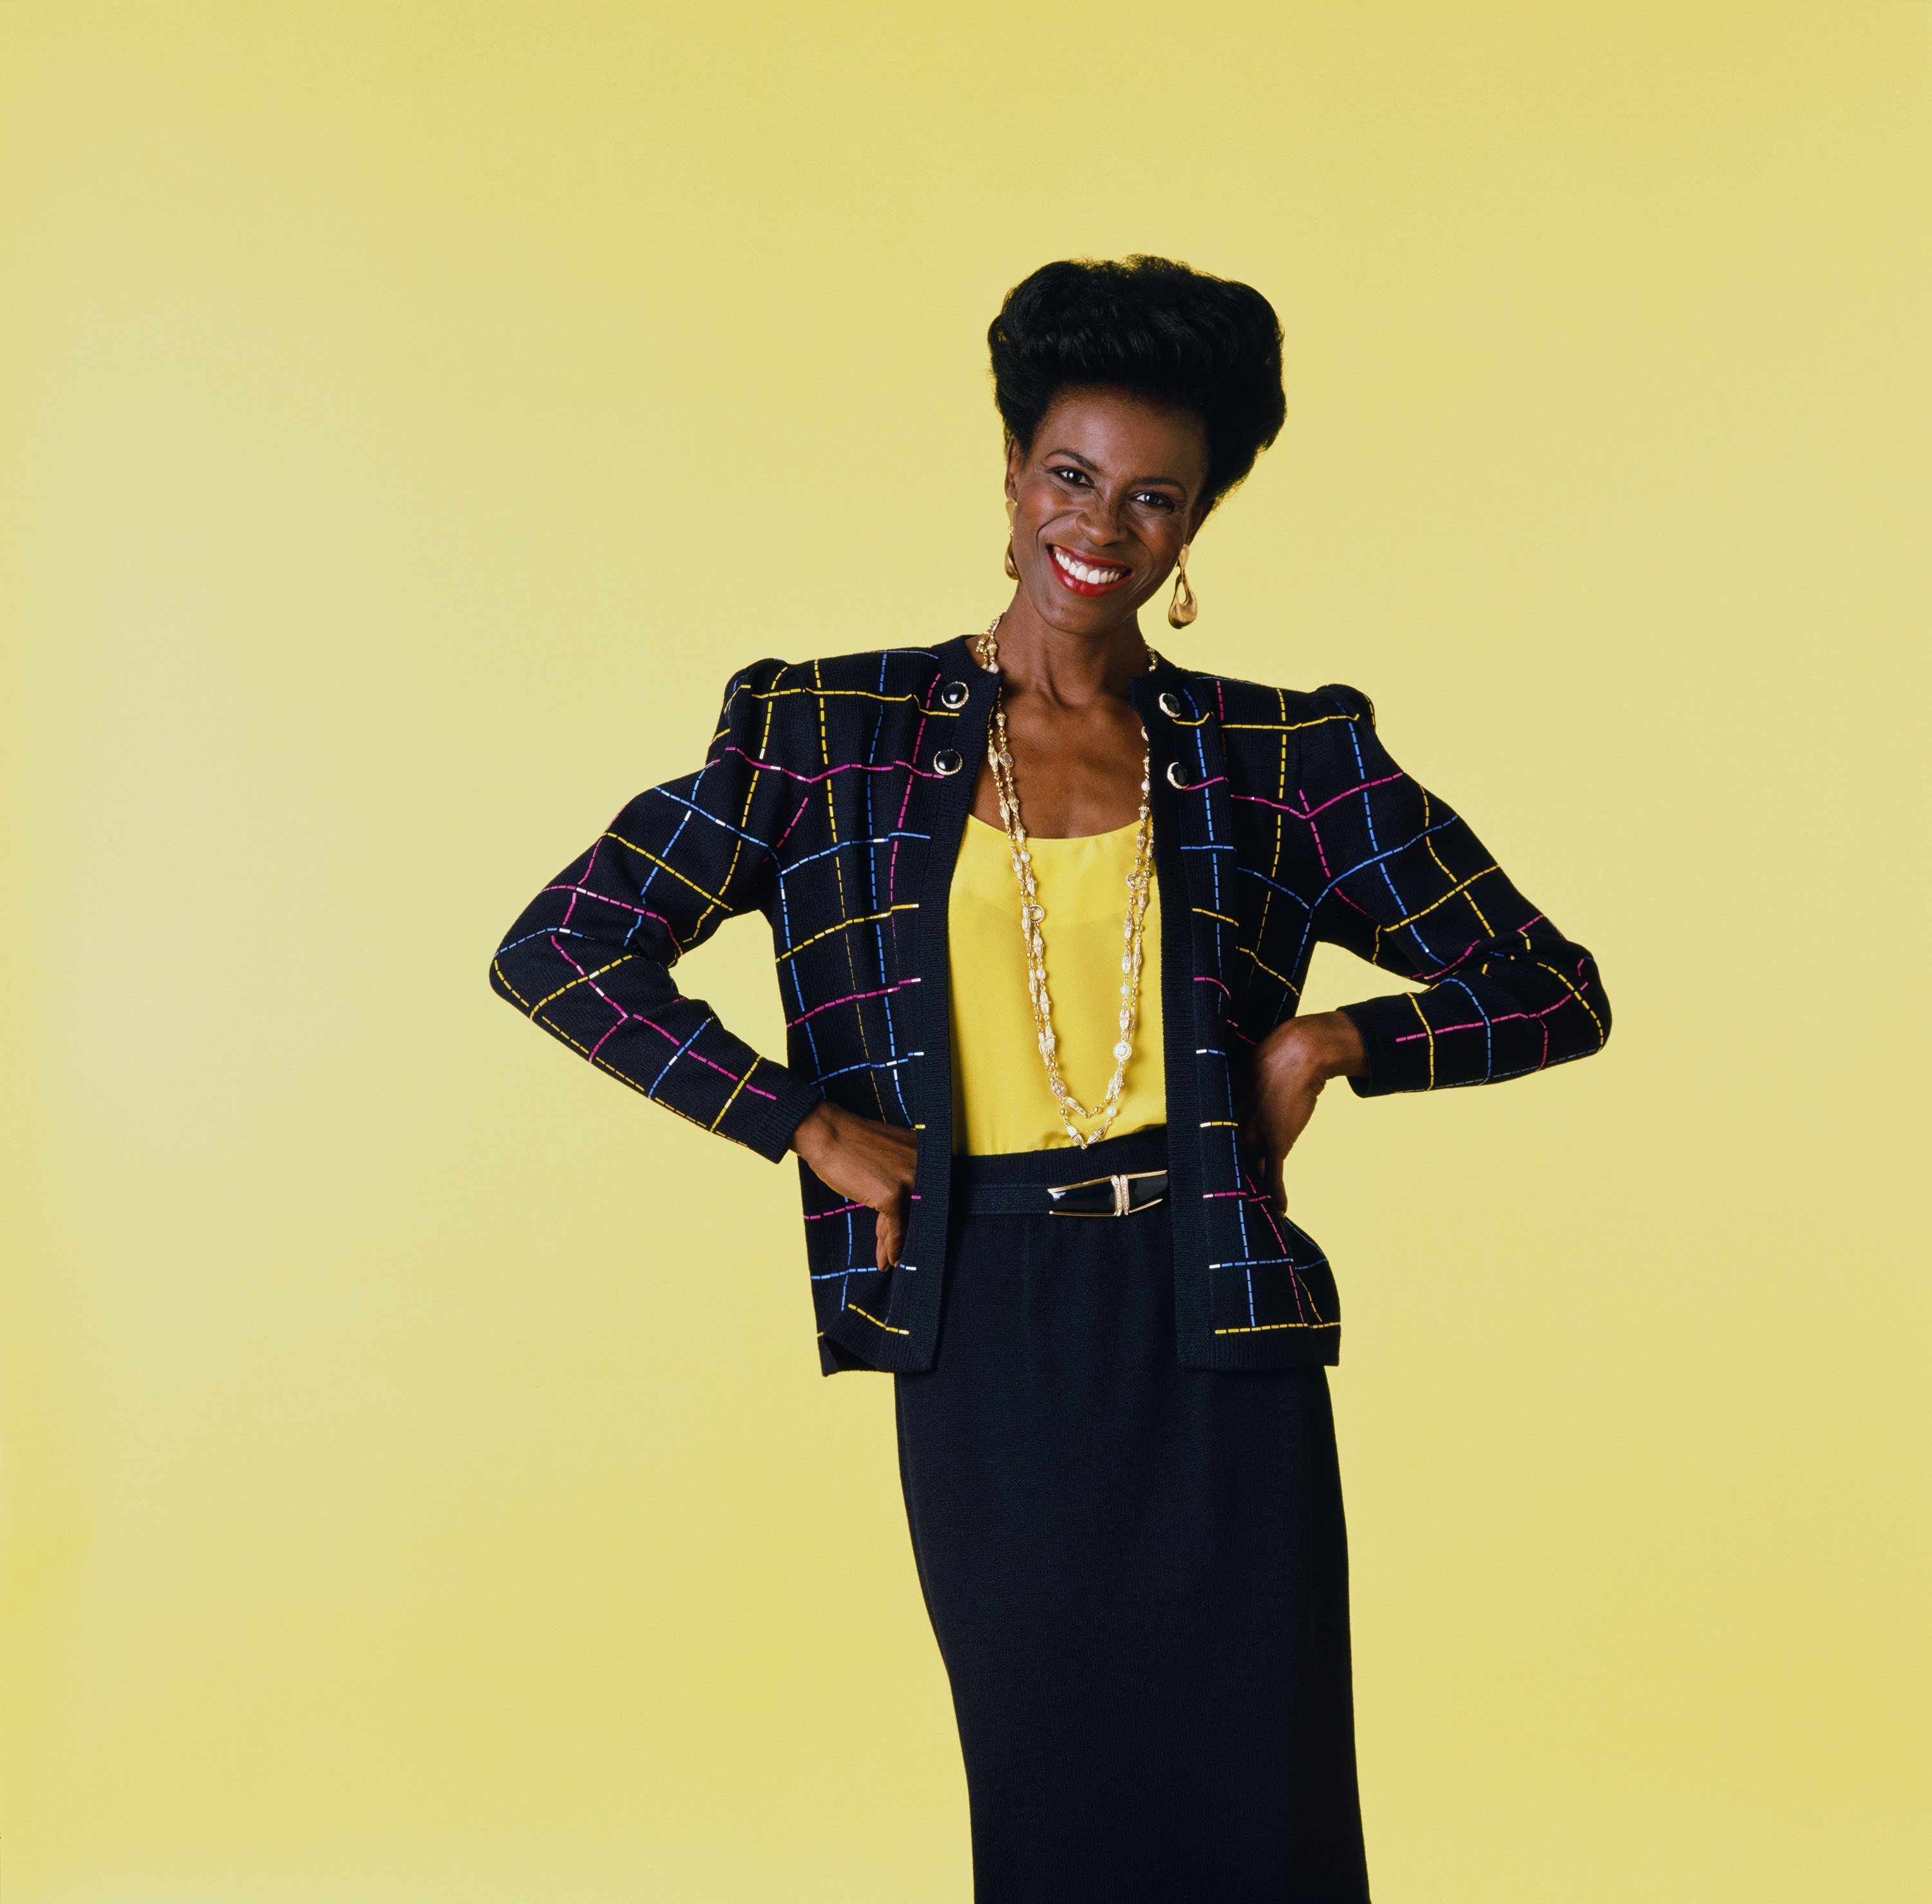 Portrait of Janet Hubert as Vivian Banks on "The Fresh Prince of Bel-Air" circa 1990 | Photo: Getty Images